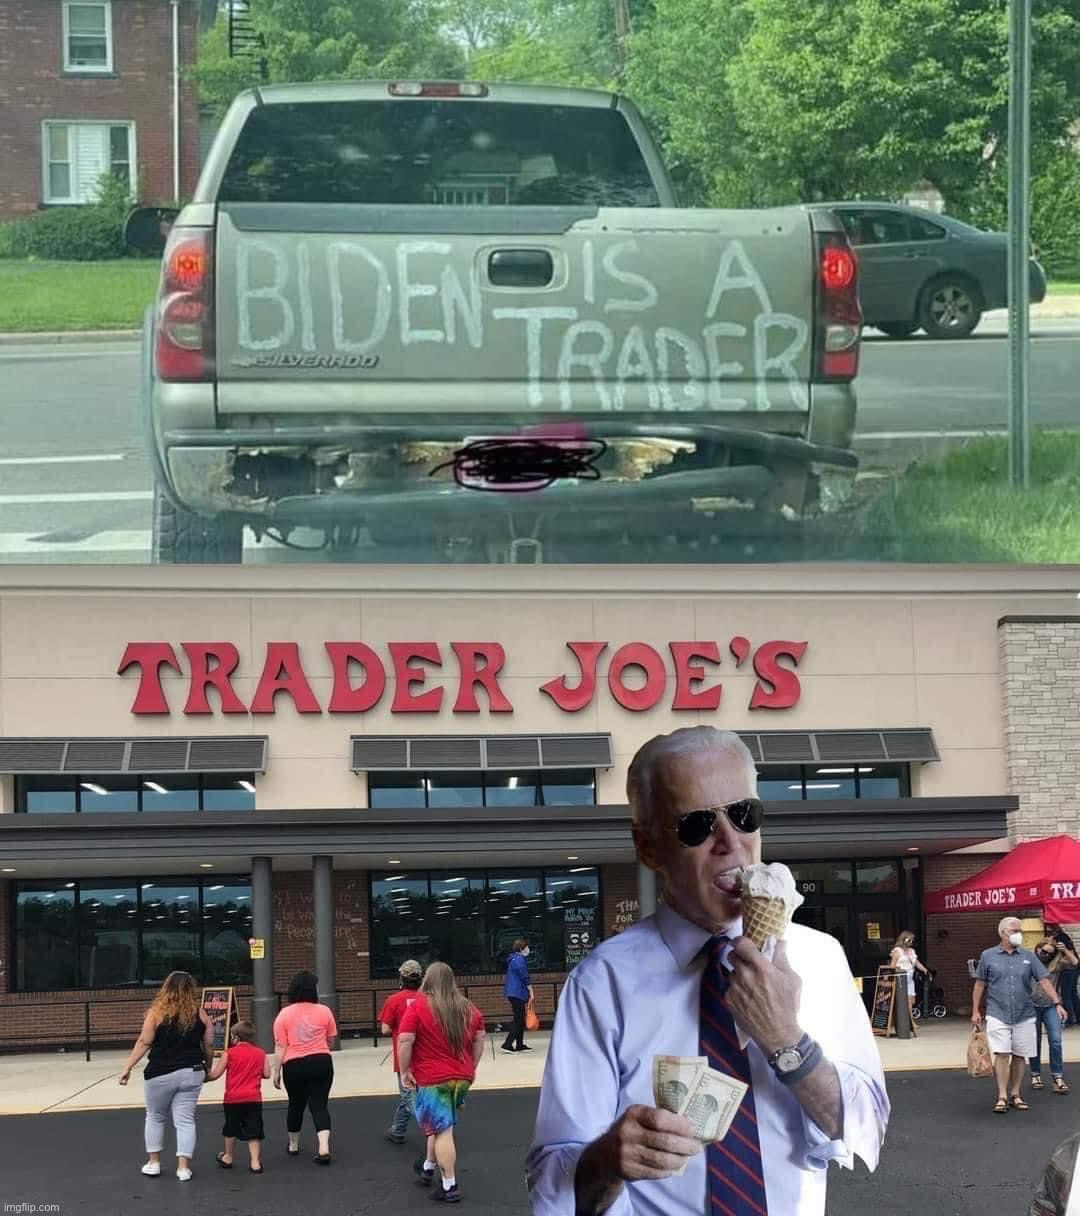 Biden is a trader | image tagged in biden is a trader | made w/ Imgflip meme maker